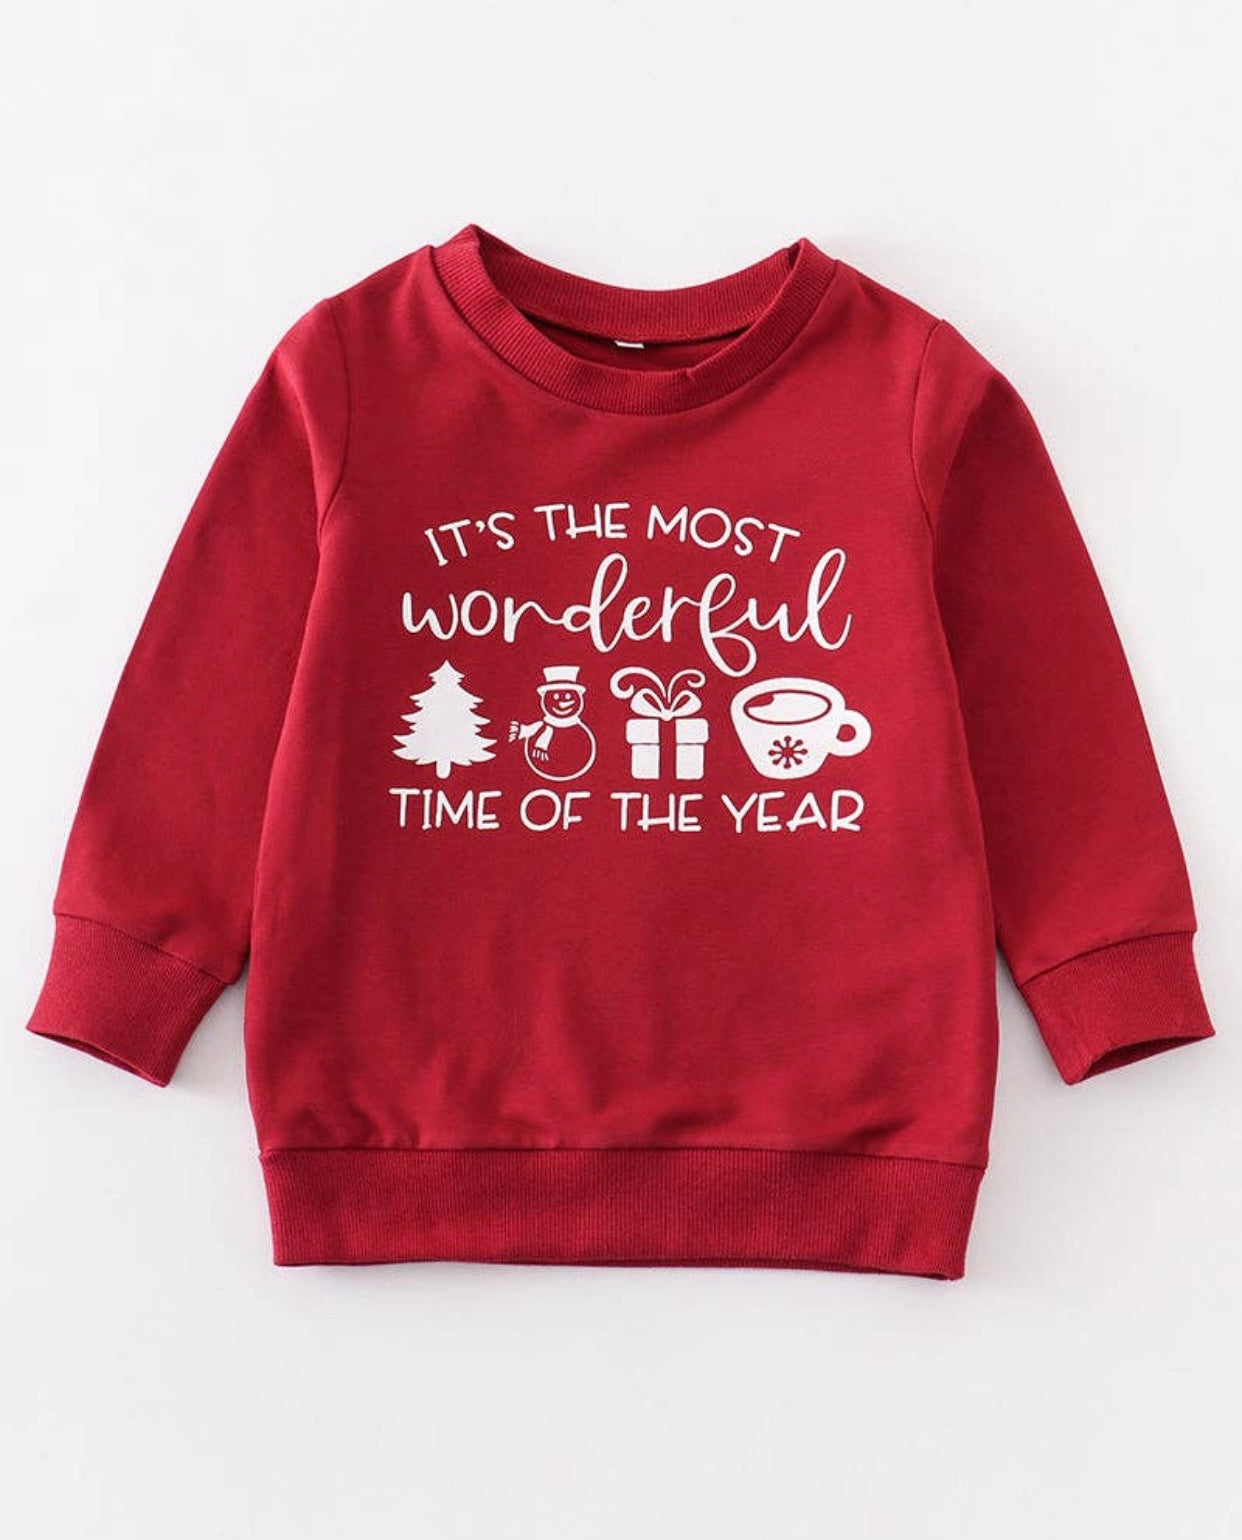 Most Wonderful Time of the Year Sweatshirt